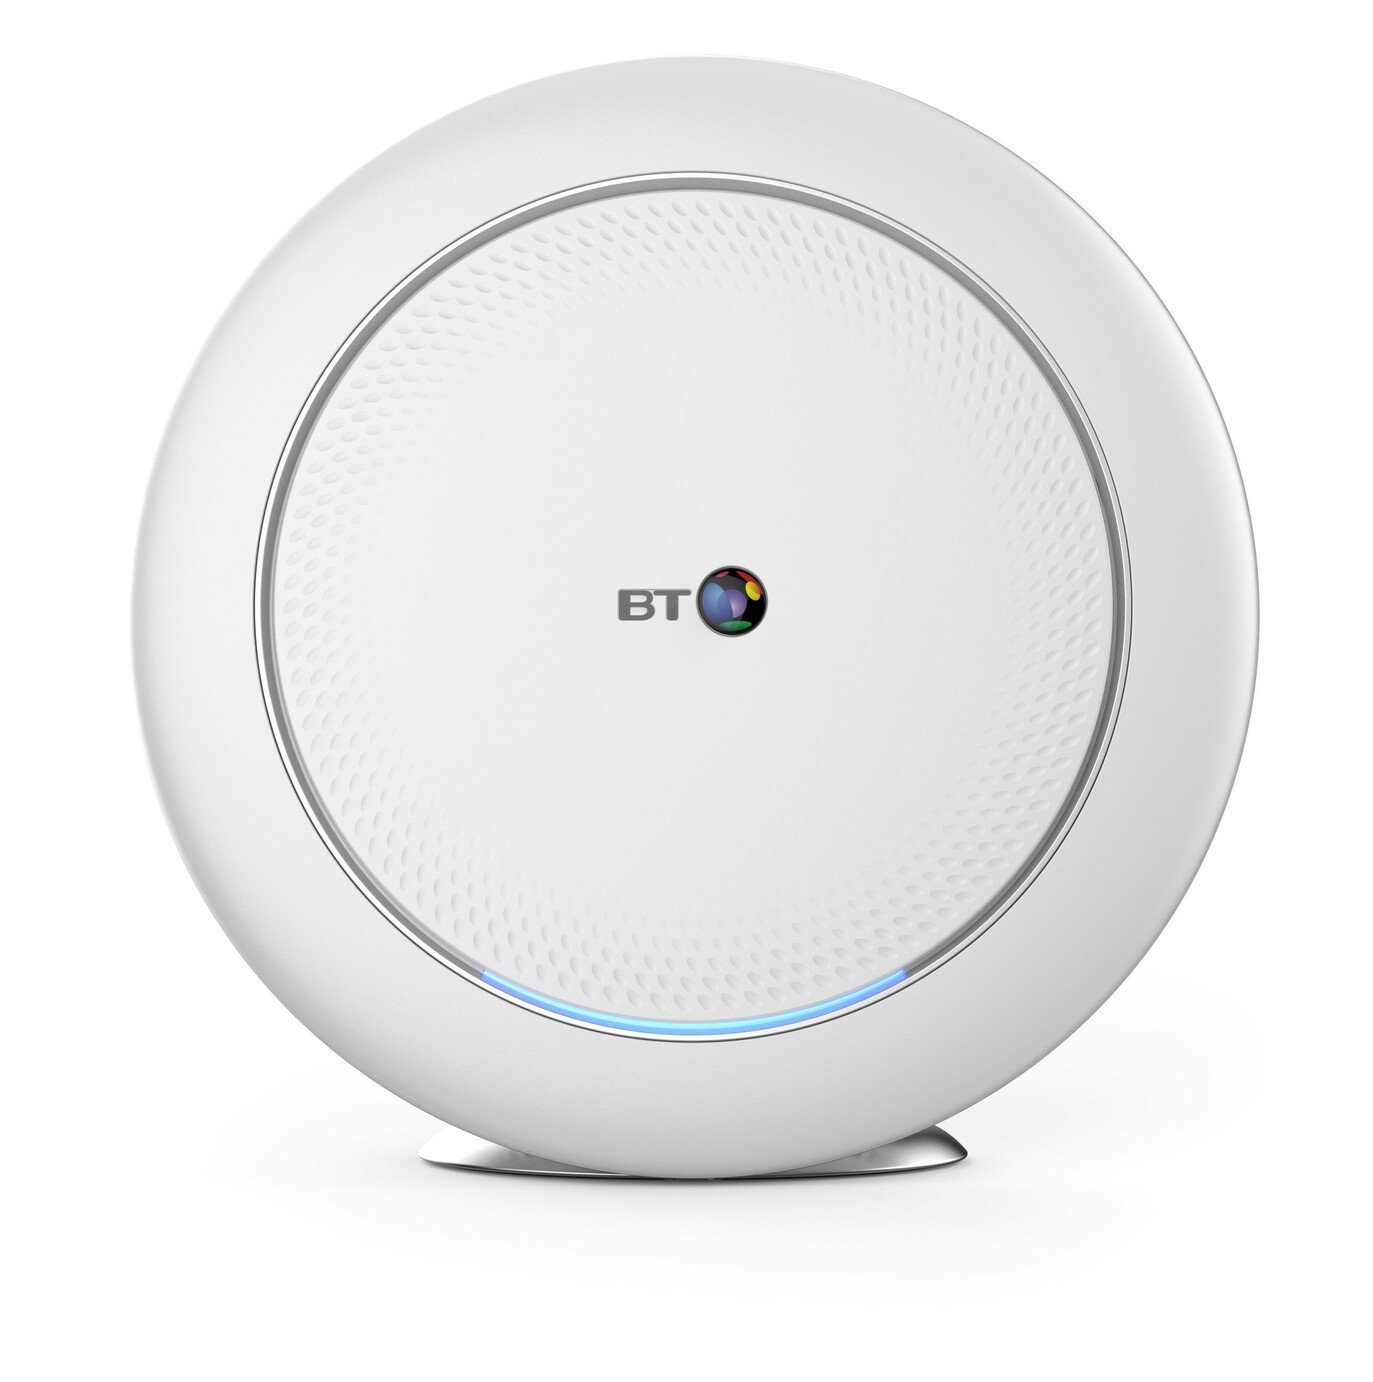 BT Premium AX3700 Whole Home Tri-Band Wi-Fi Add-On Disc Review